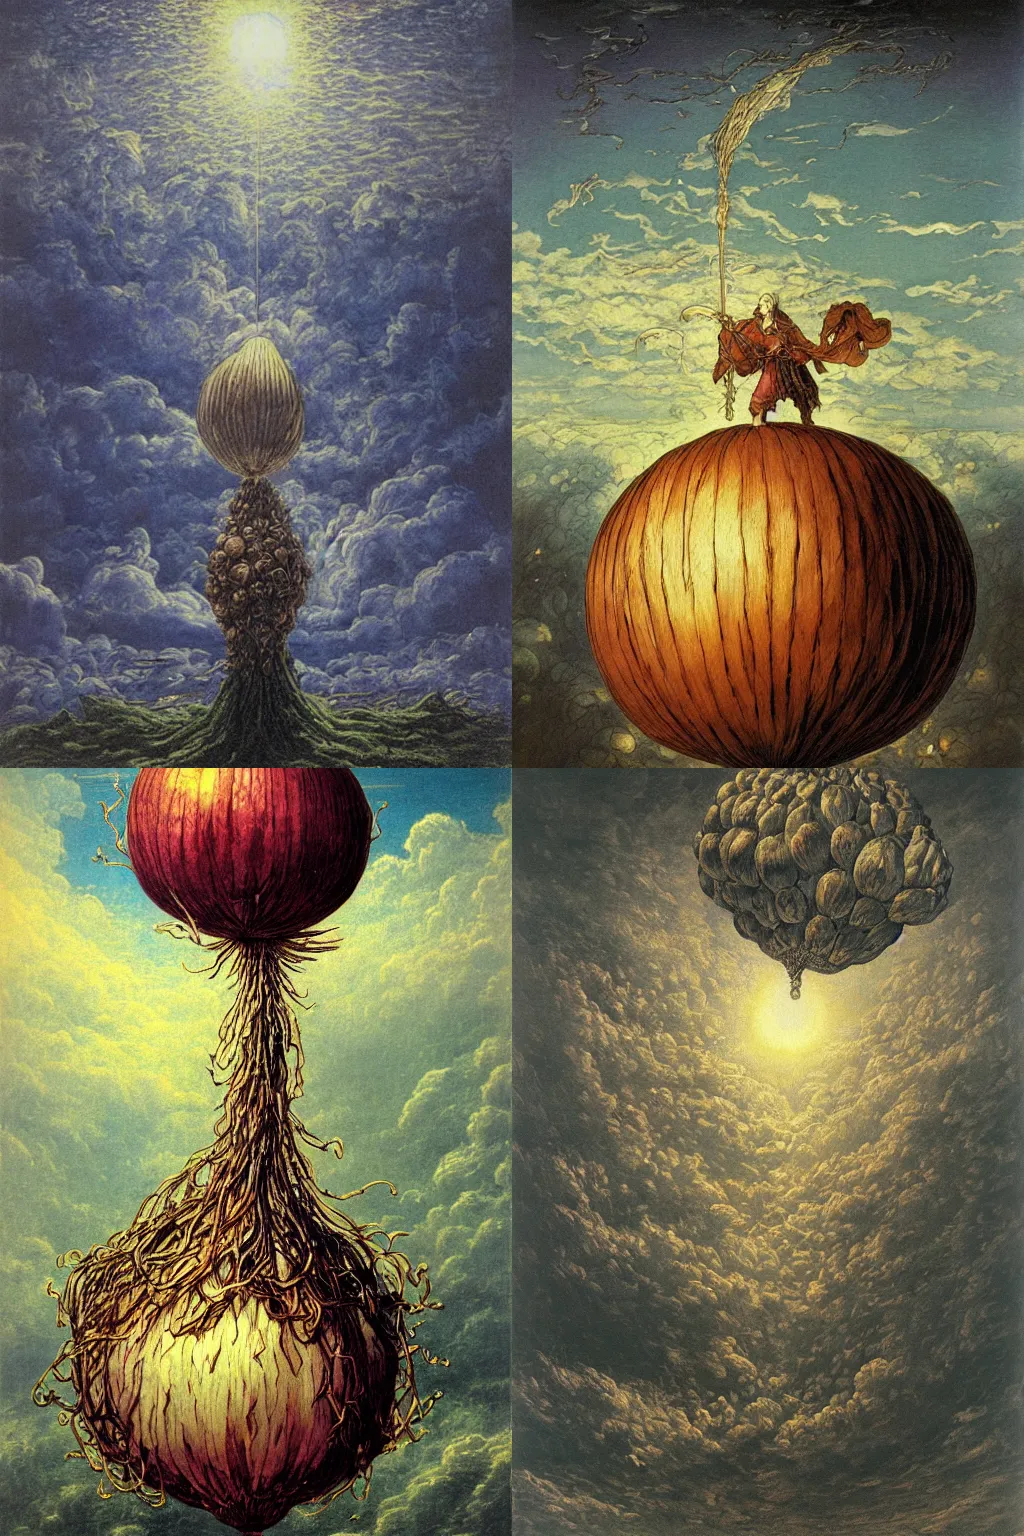 Prompt: giant onion reaches pierces the clouds and reaches the heavens by Yoshitaka Amano, oil painting on canvas, style of Gustave Dore